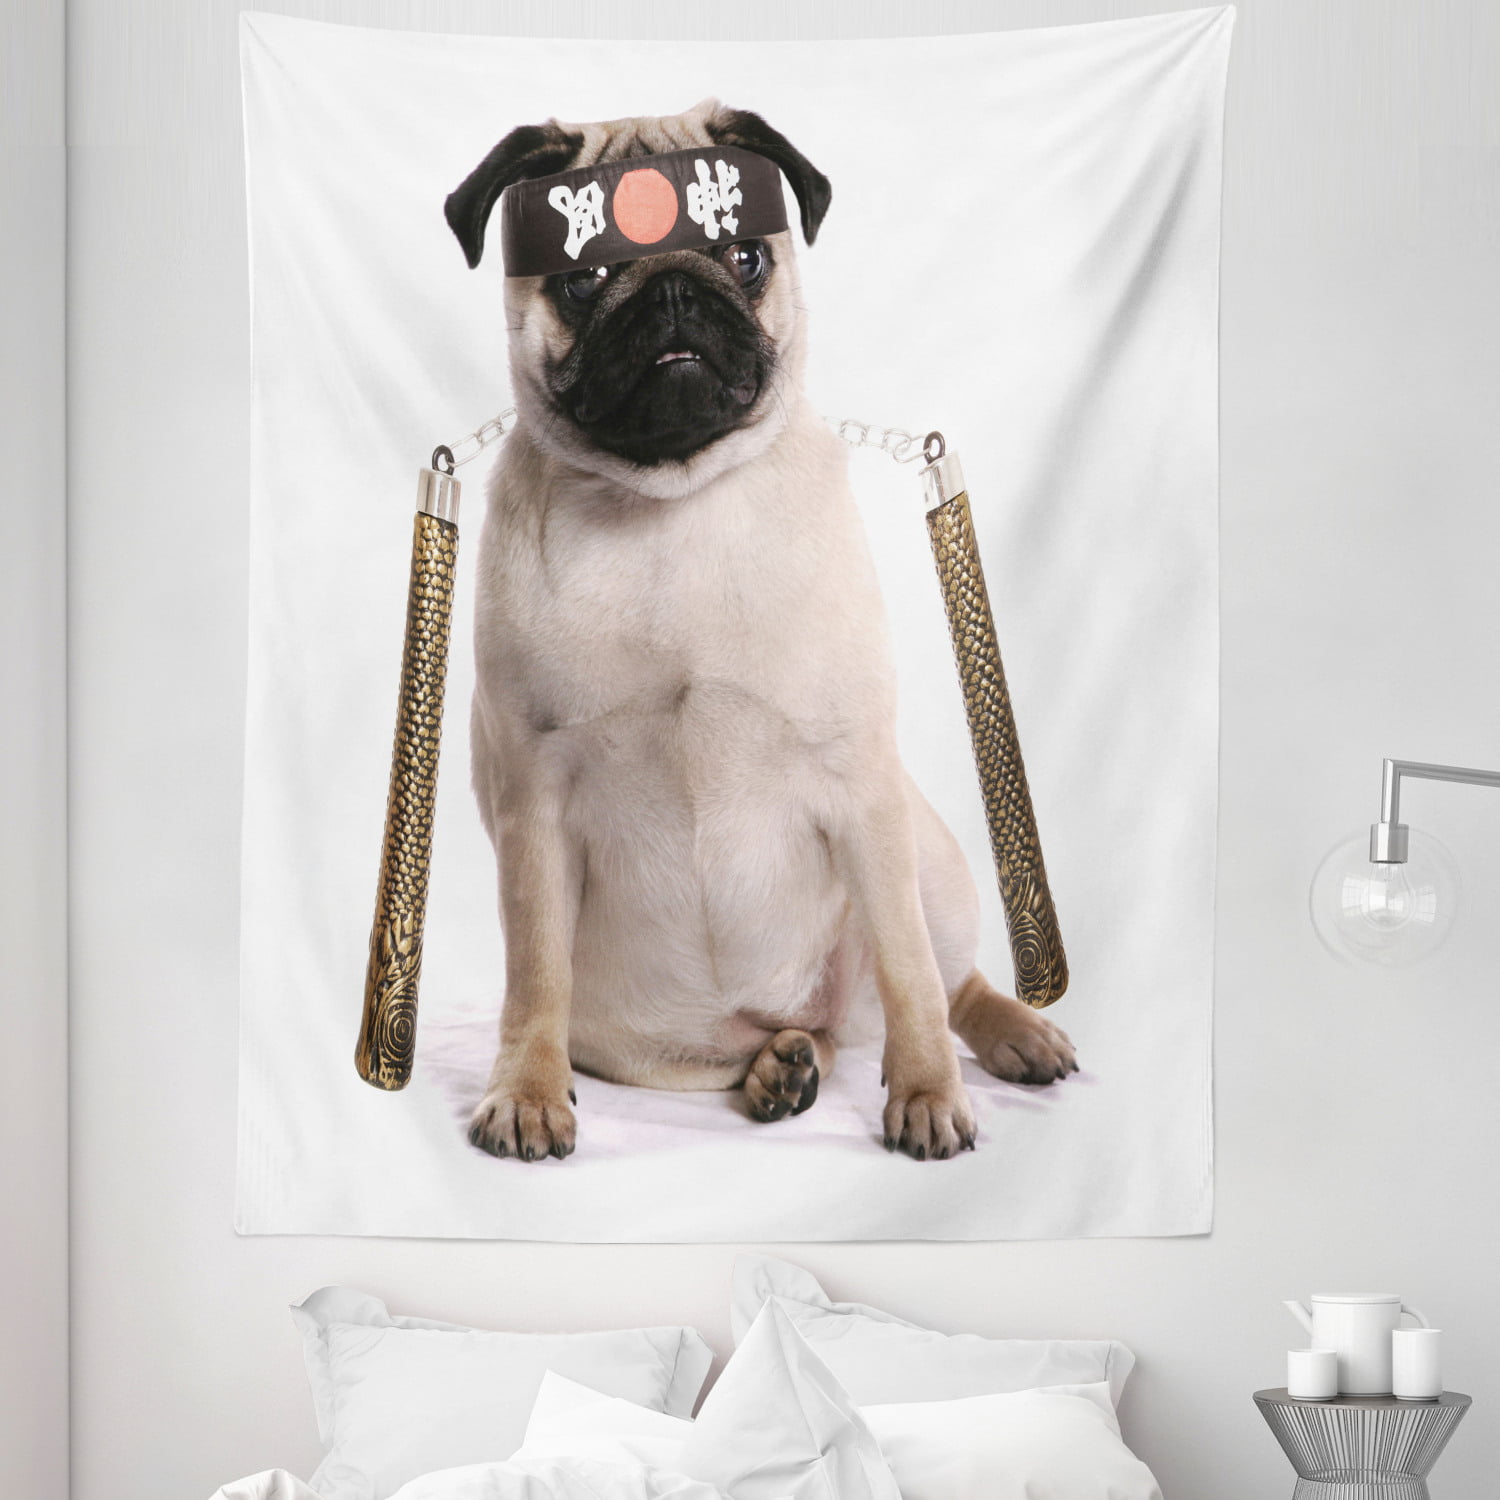 Lovely Pug Puppy Pet Animal Tapestry Wall Hanging Rug for Living Room Dorm Decor 